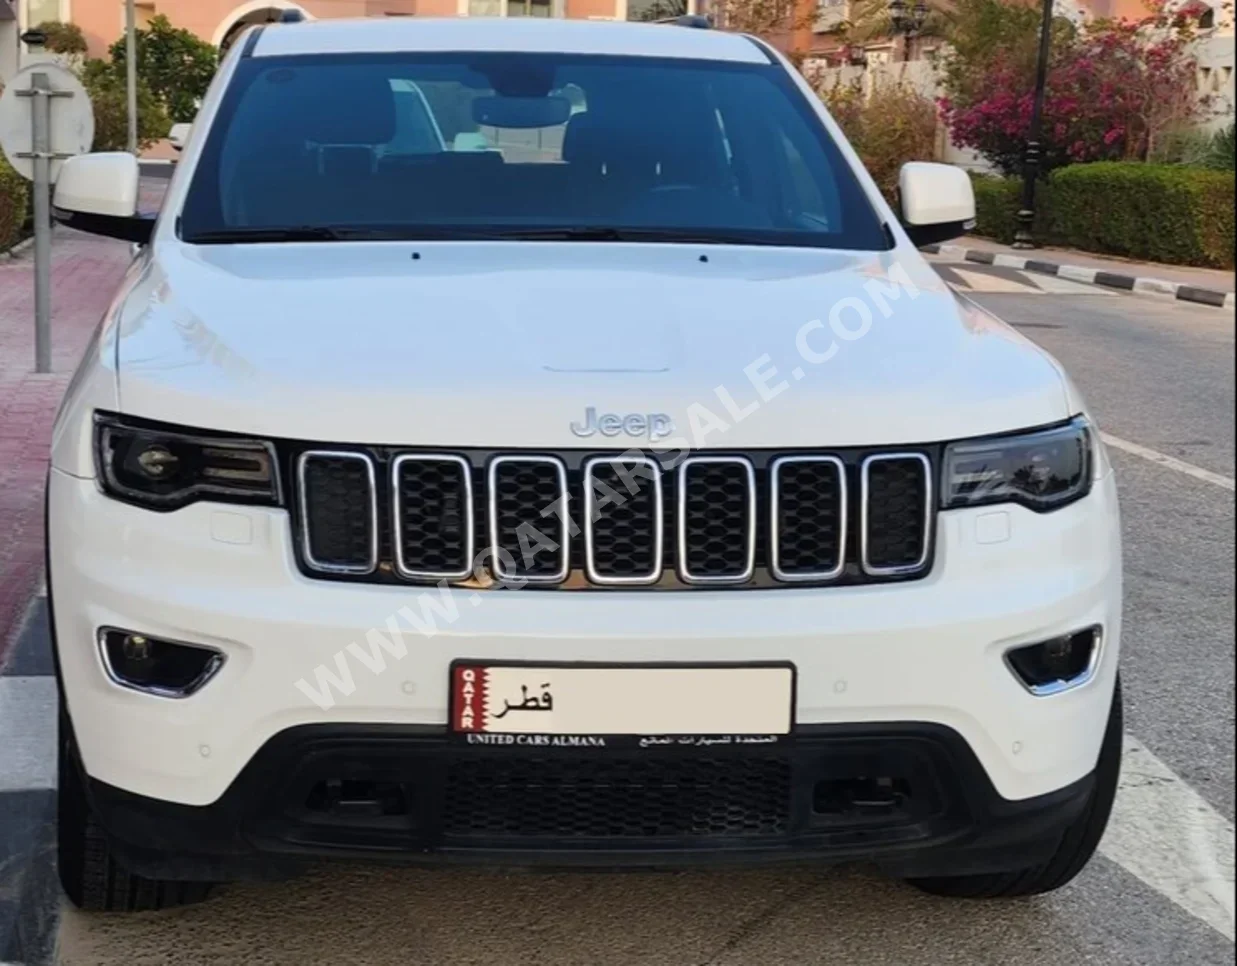 Jeep  Grand Cherokee  Laredo  2021  Automatic  23,700 Km  6 Cylinder  Four Wheel Drive (4WD)  SUV  White  With Warranty